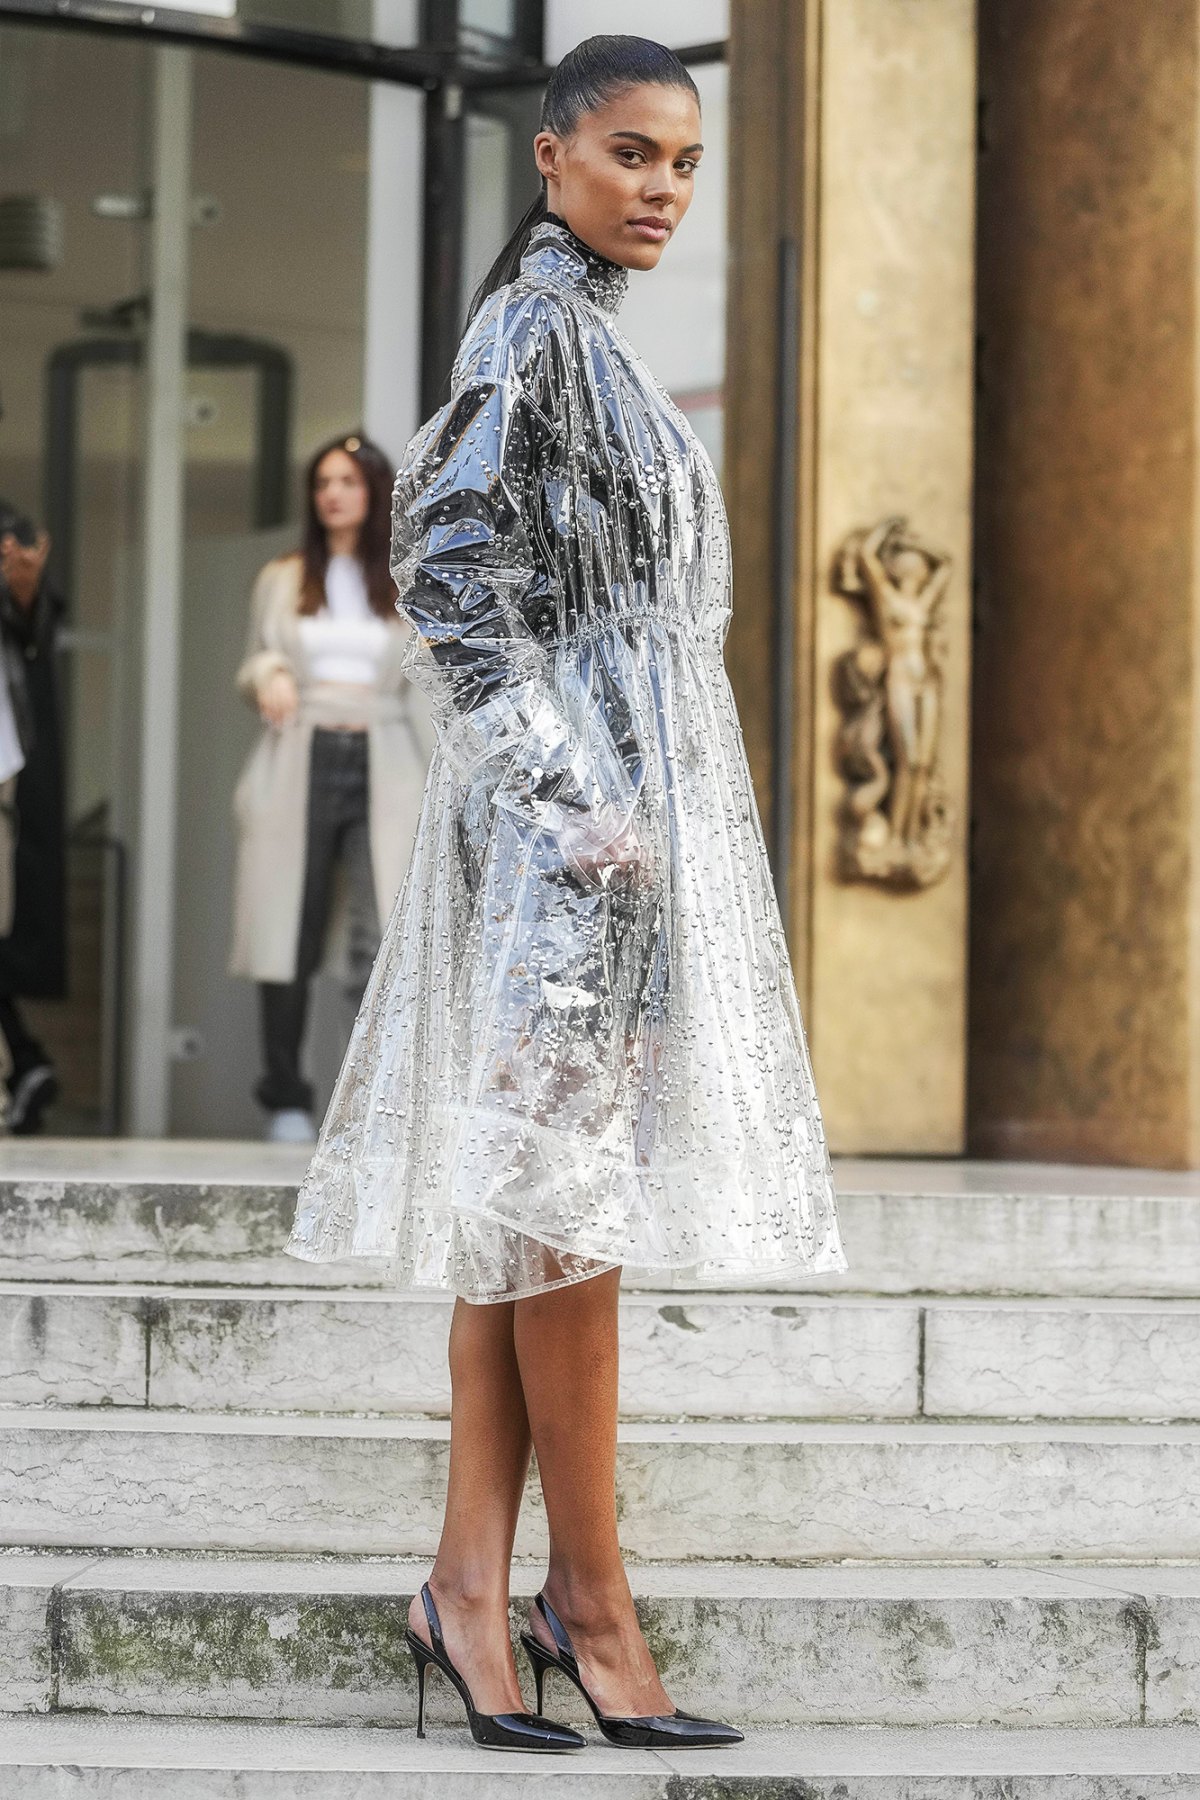 From Longest Trench Coat To Gray-Silver Dior Gown, A Look At